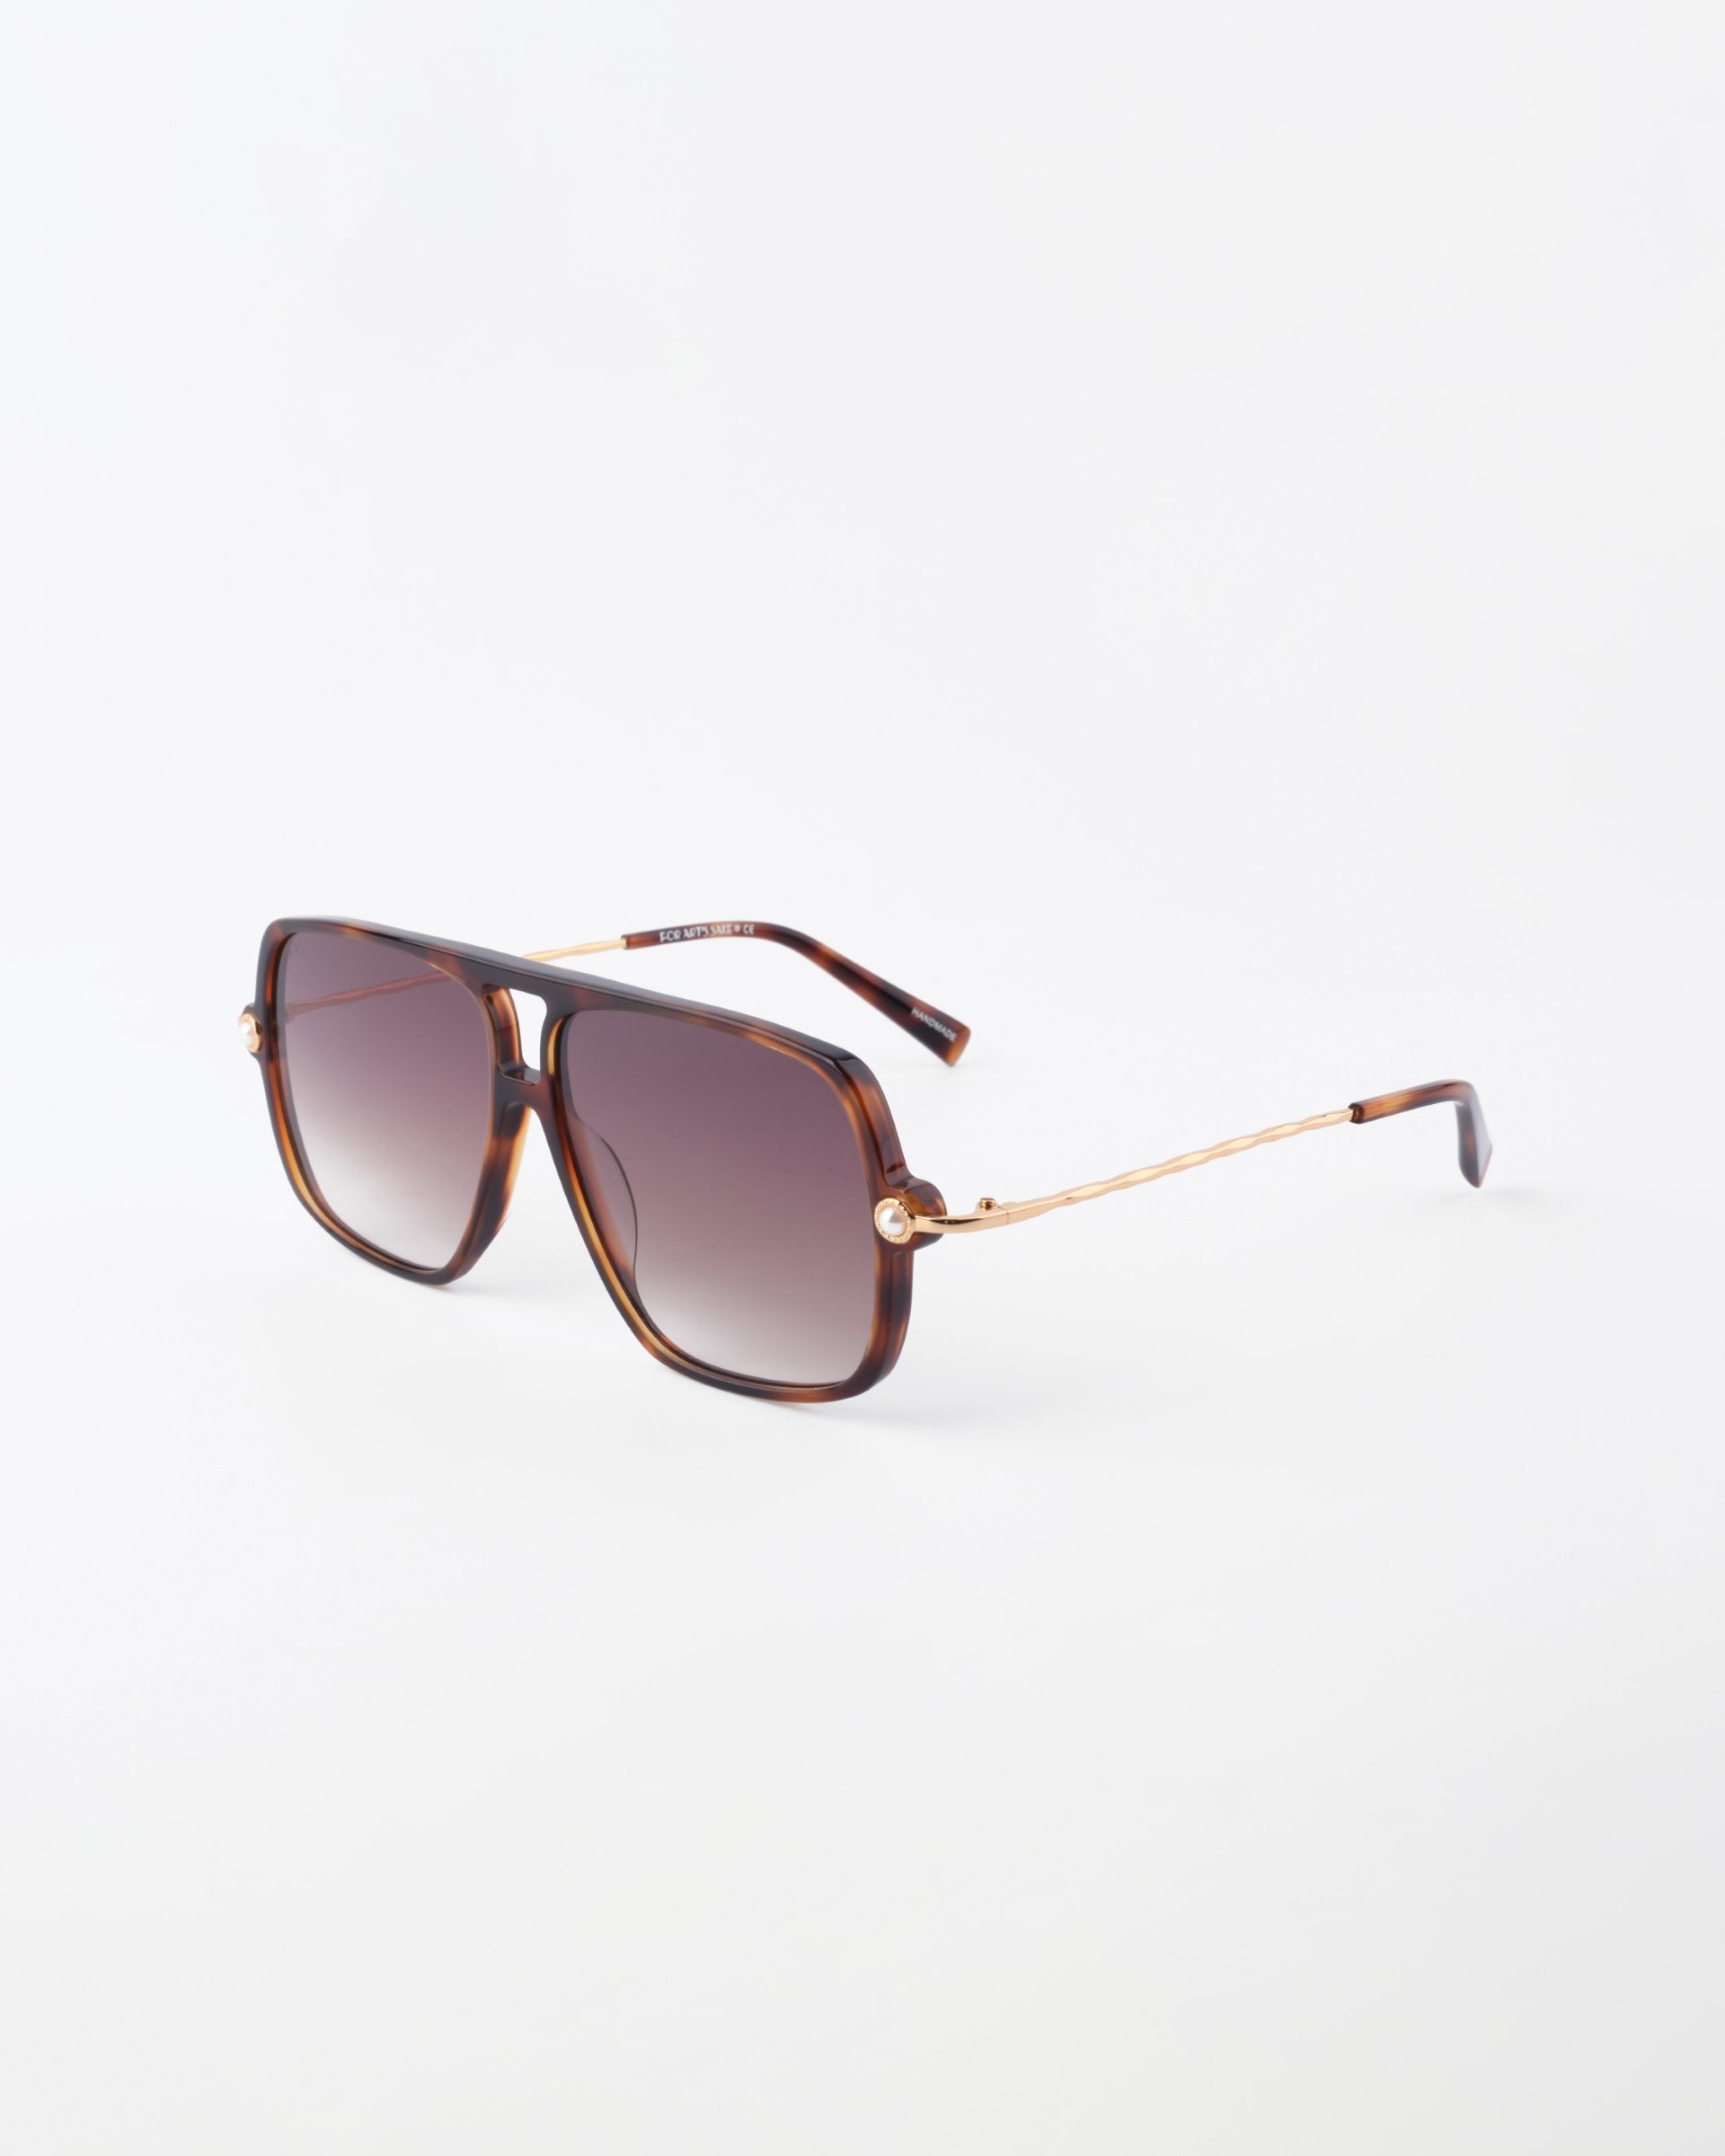 A pair of Cinnamon sunglasses by For Art's Sake® with a brown tortoiseshell frame and dark gradient lenses. The slim arms feature a gold metallic accent near the hinges, resembling 18-karat gold-plated elegance.